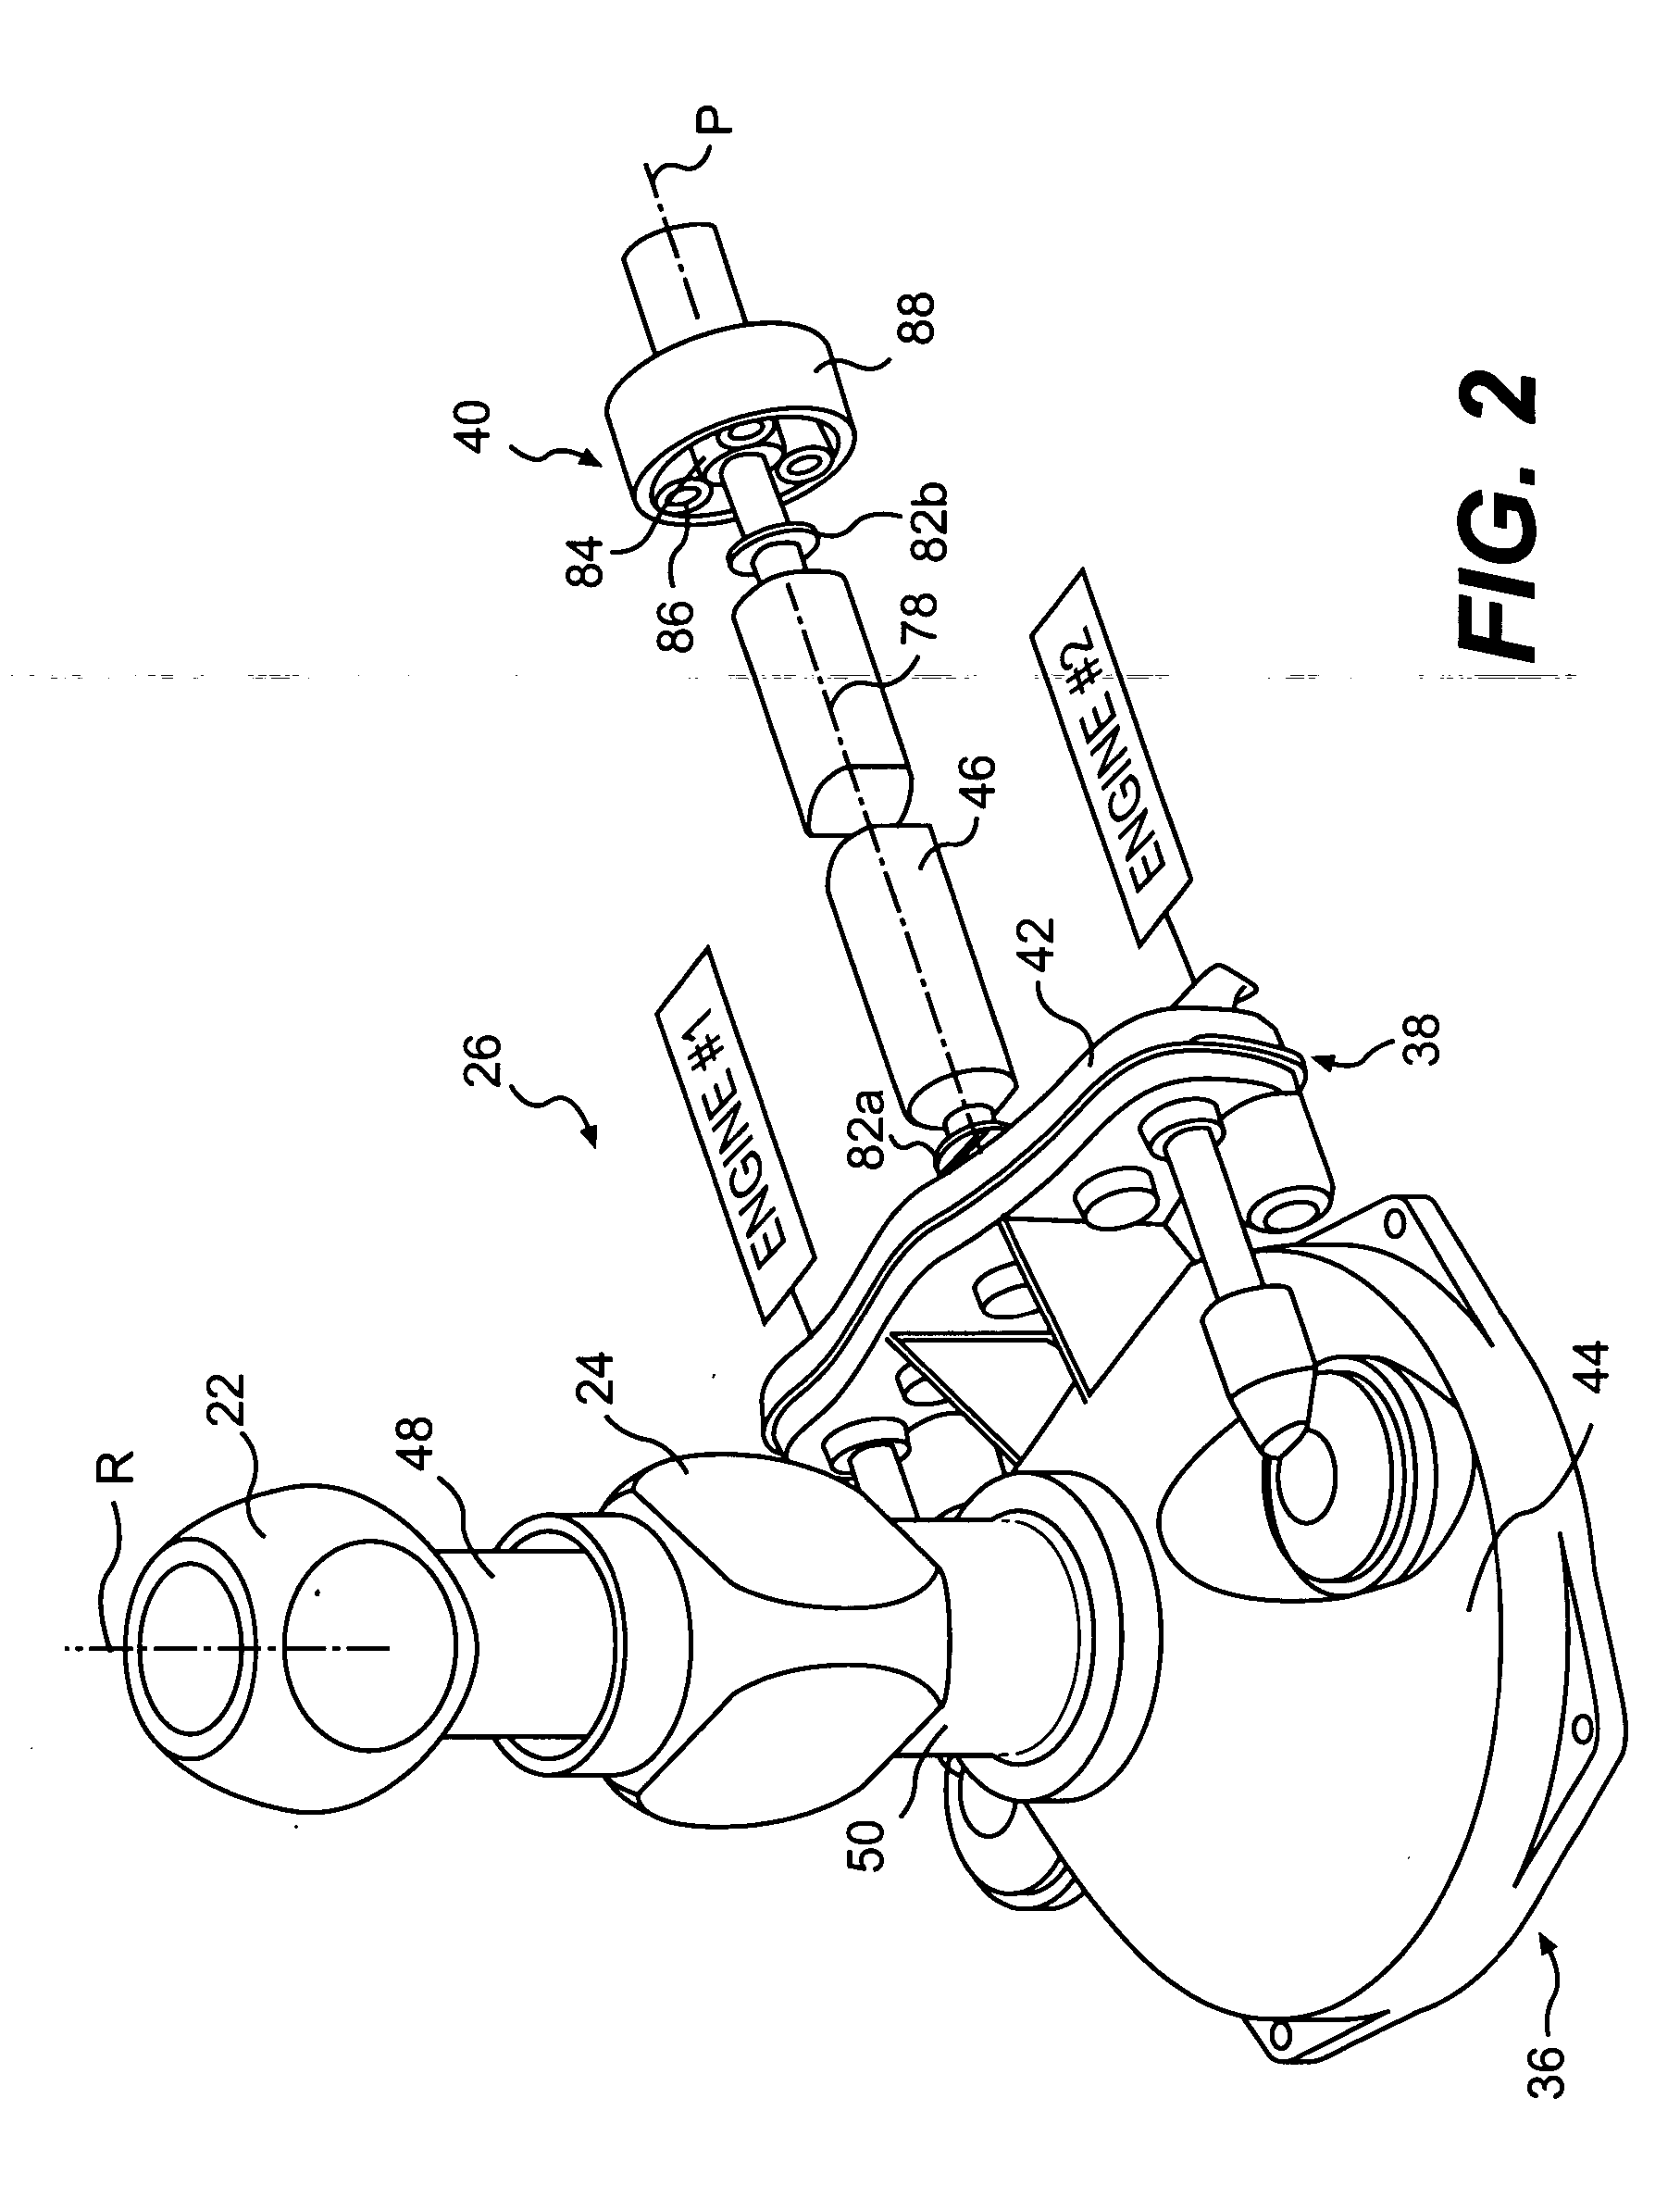 Split torque gearbox for rotary wing aircraft with translational thrust system